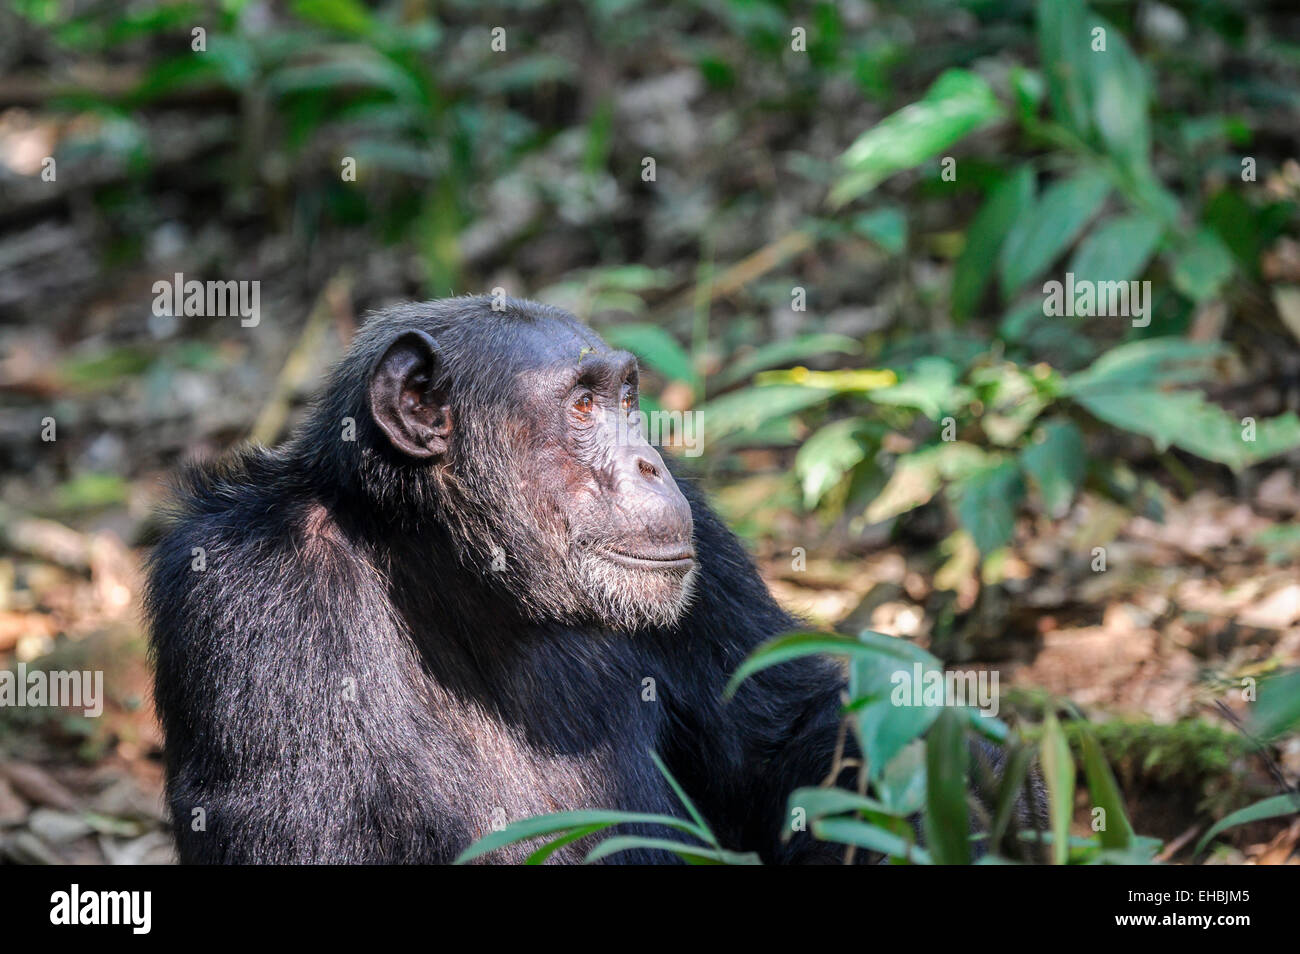 Adult male a chimpanzee (Pan troglodytes) sits in a clearing in Kibale Forest, Uganda. Horizontal format with copyspace. Stock Photo